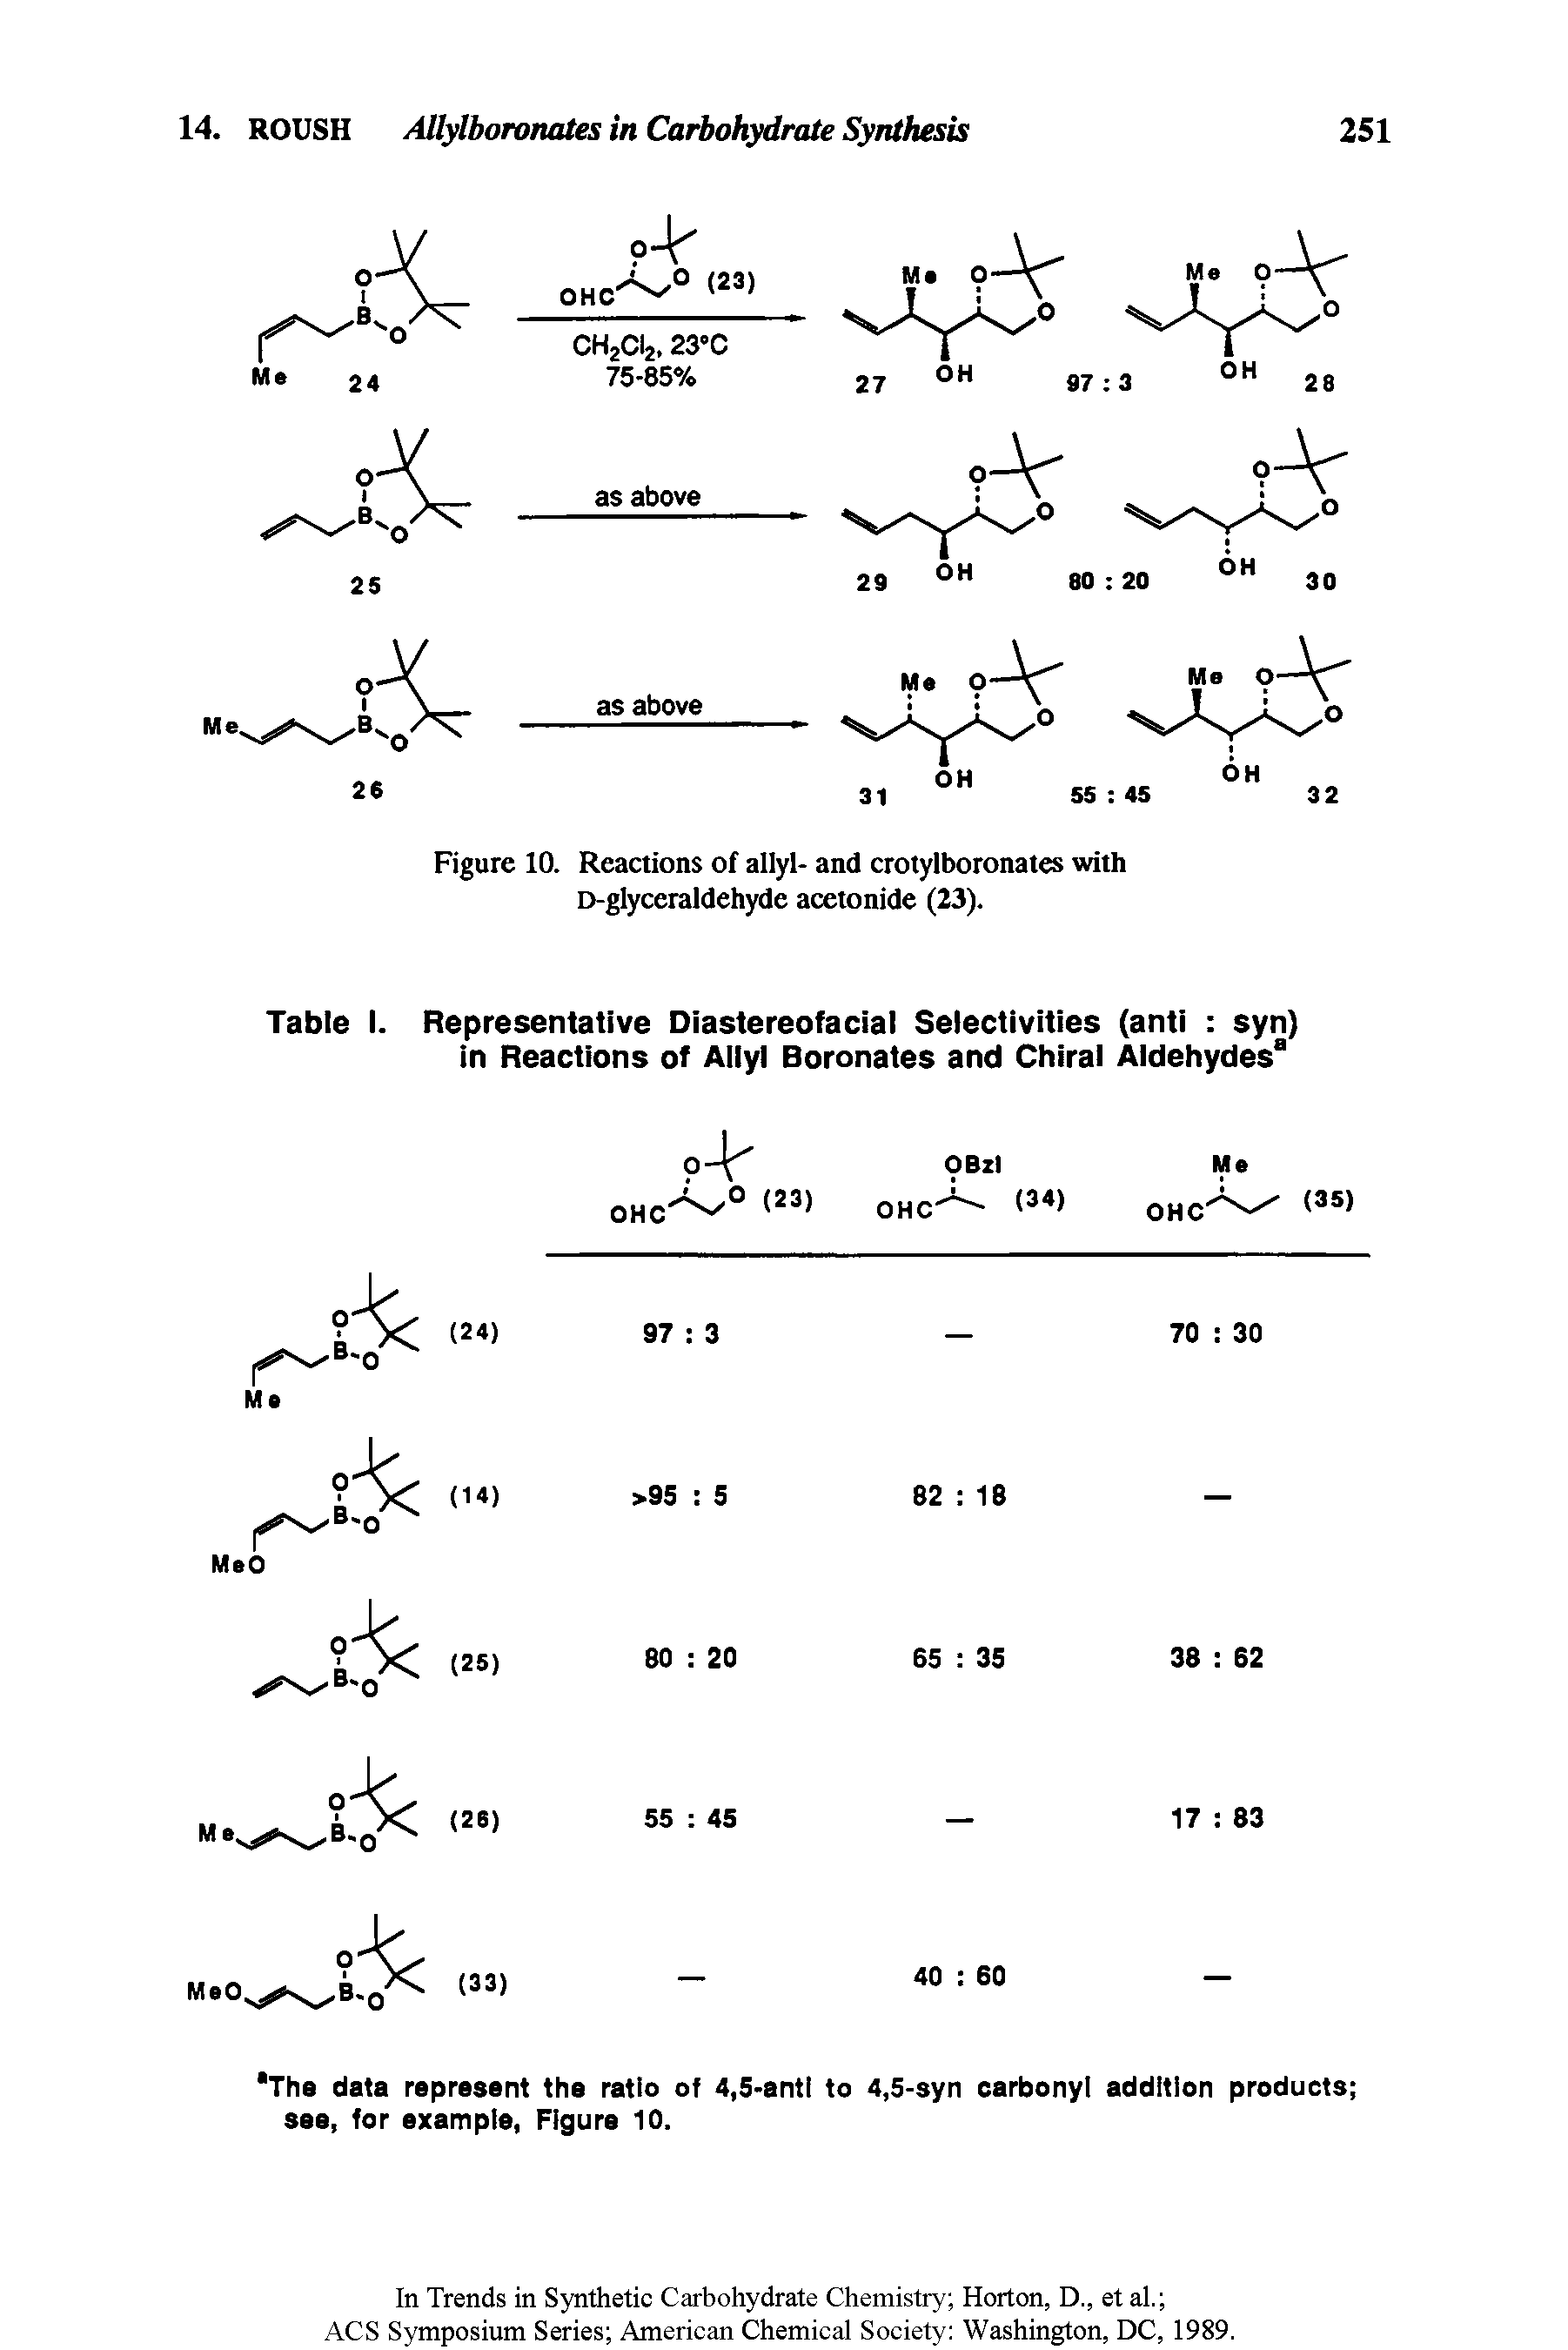 Figure 10. Reactions of allyl- and crotylboronates with D-glyceraldehyde acetonide (23).